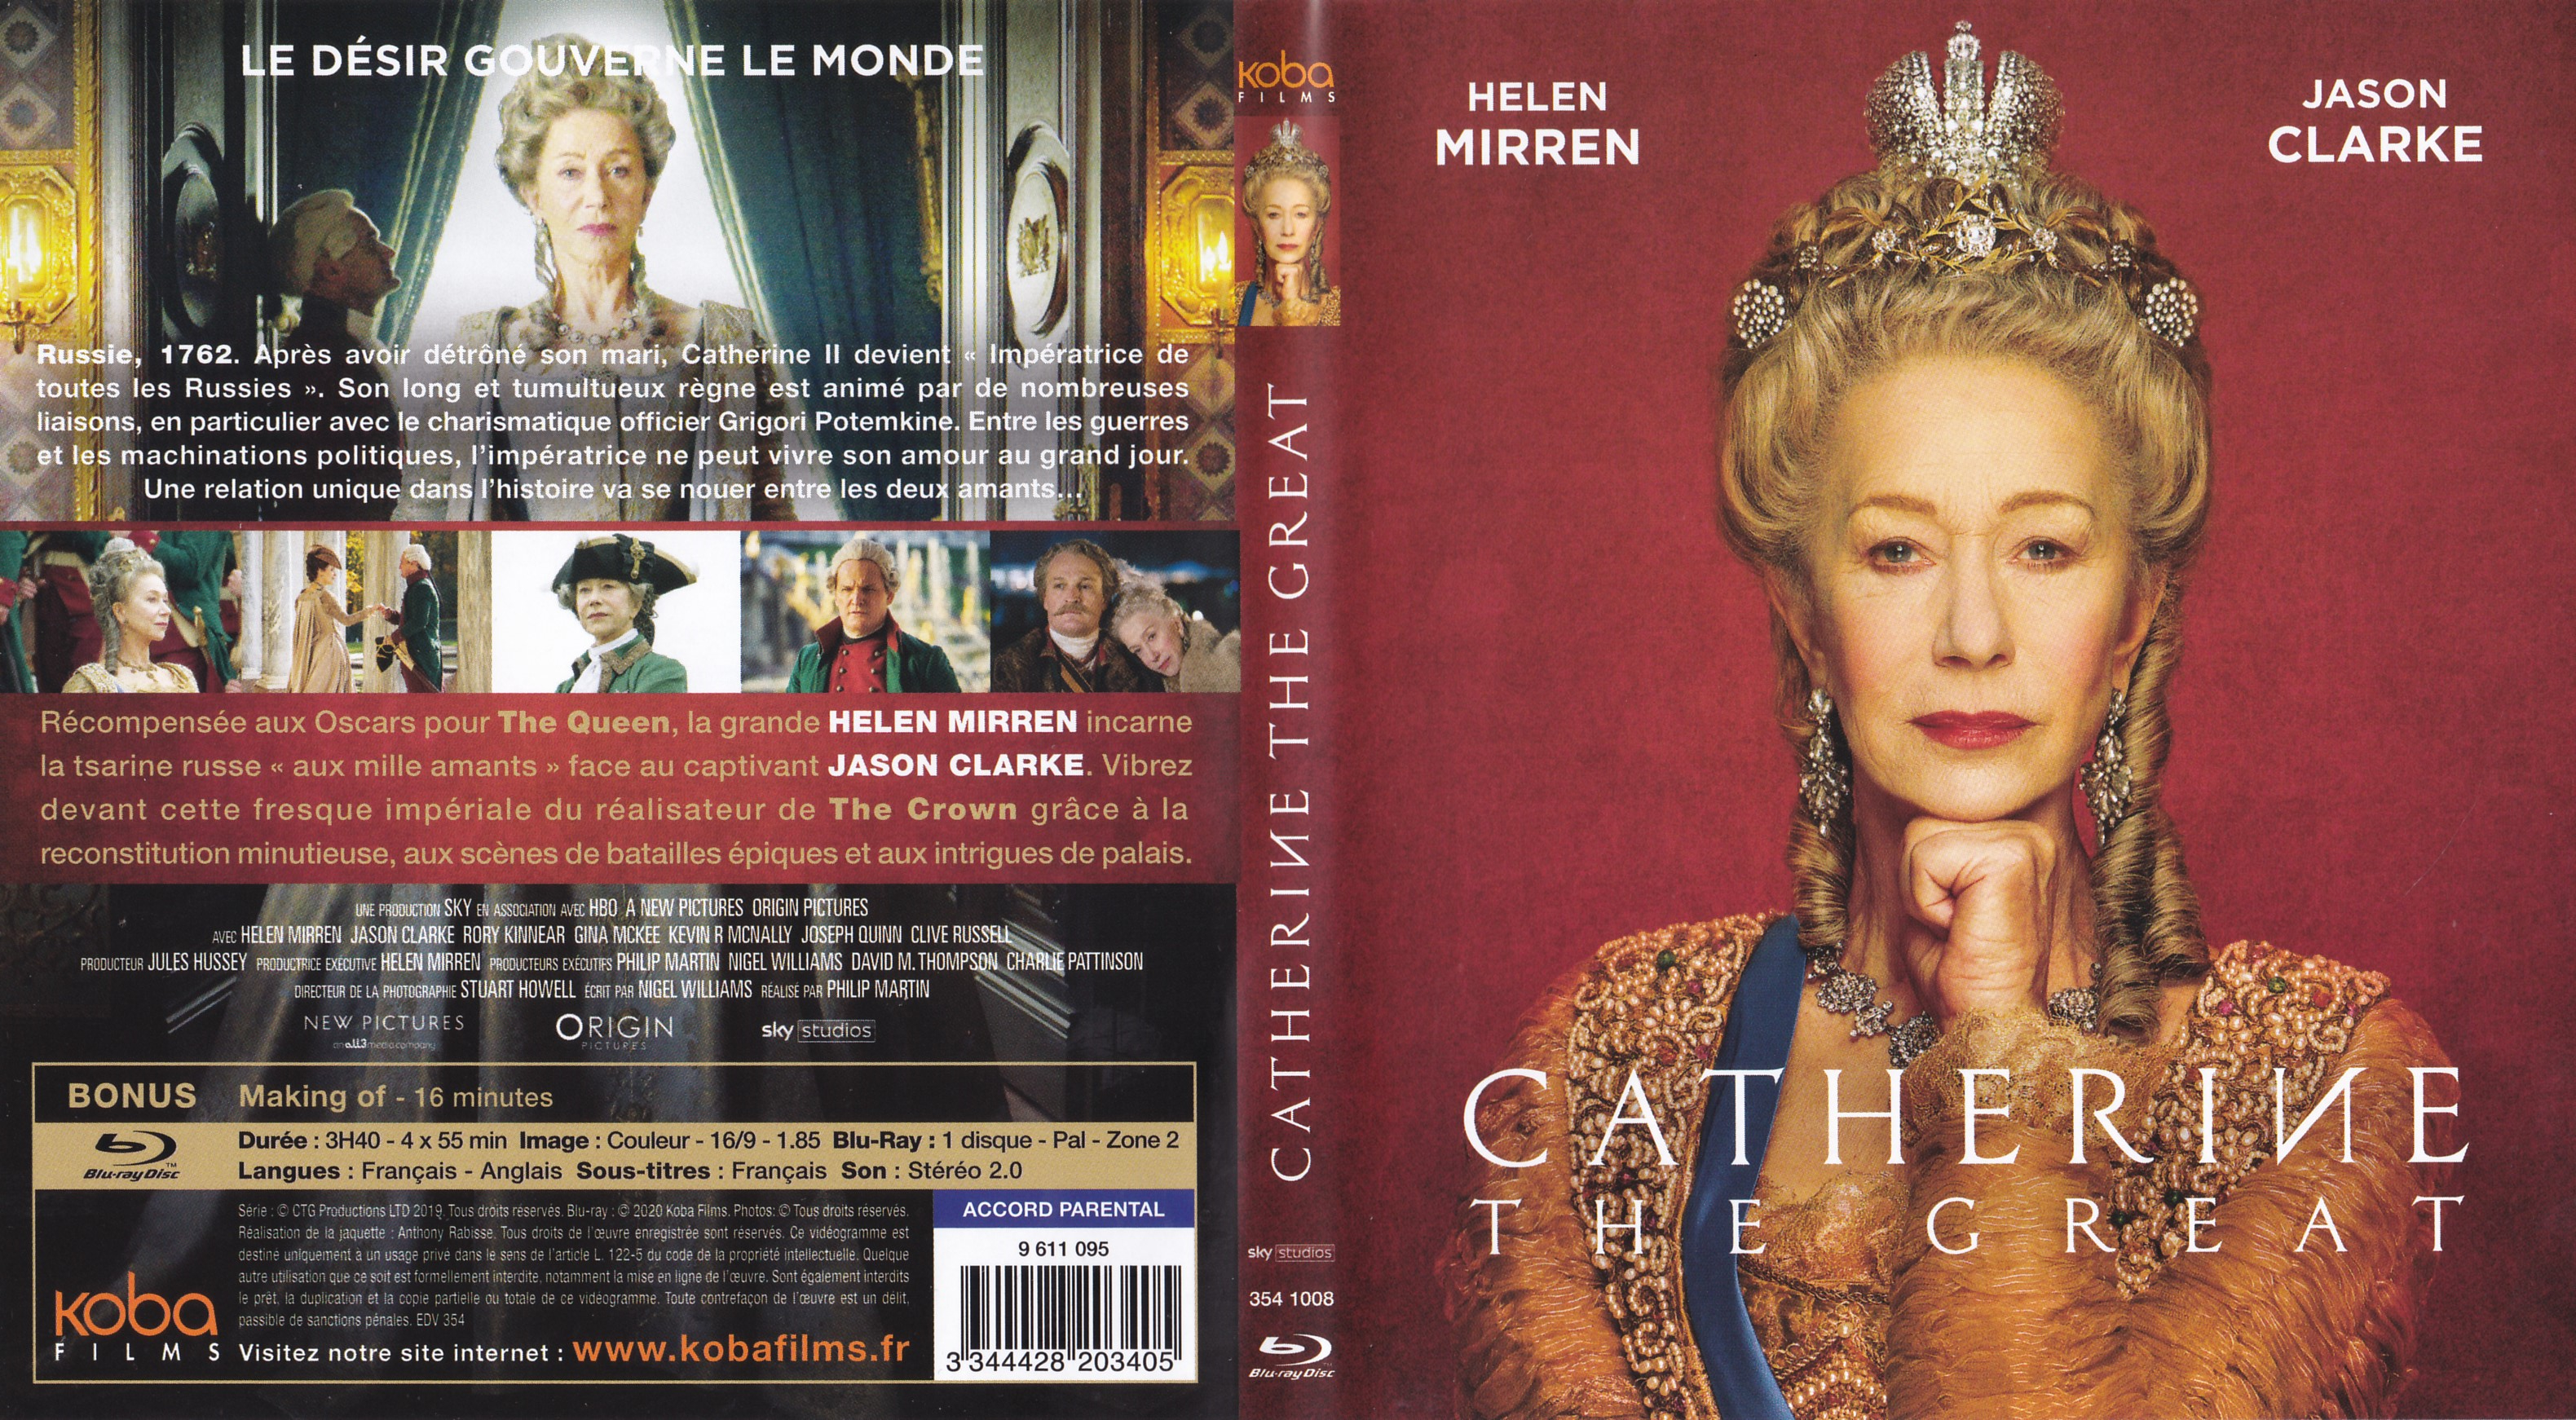 Jaquette DVD Catherine The great (BLU-RAY)